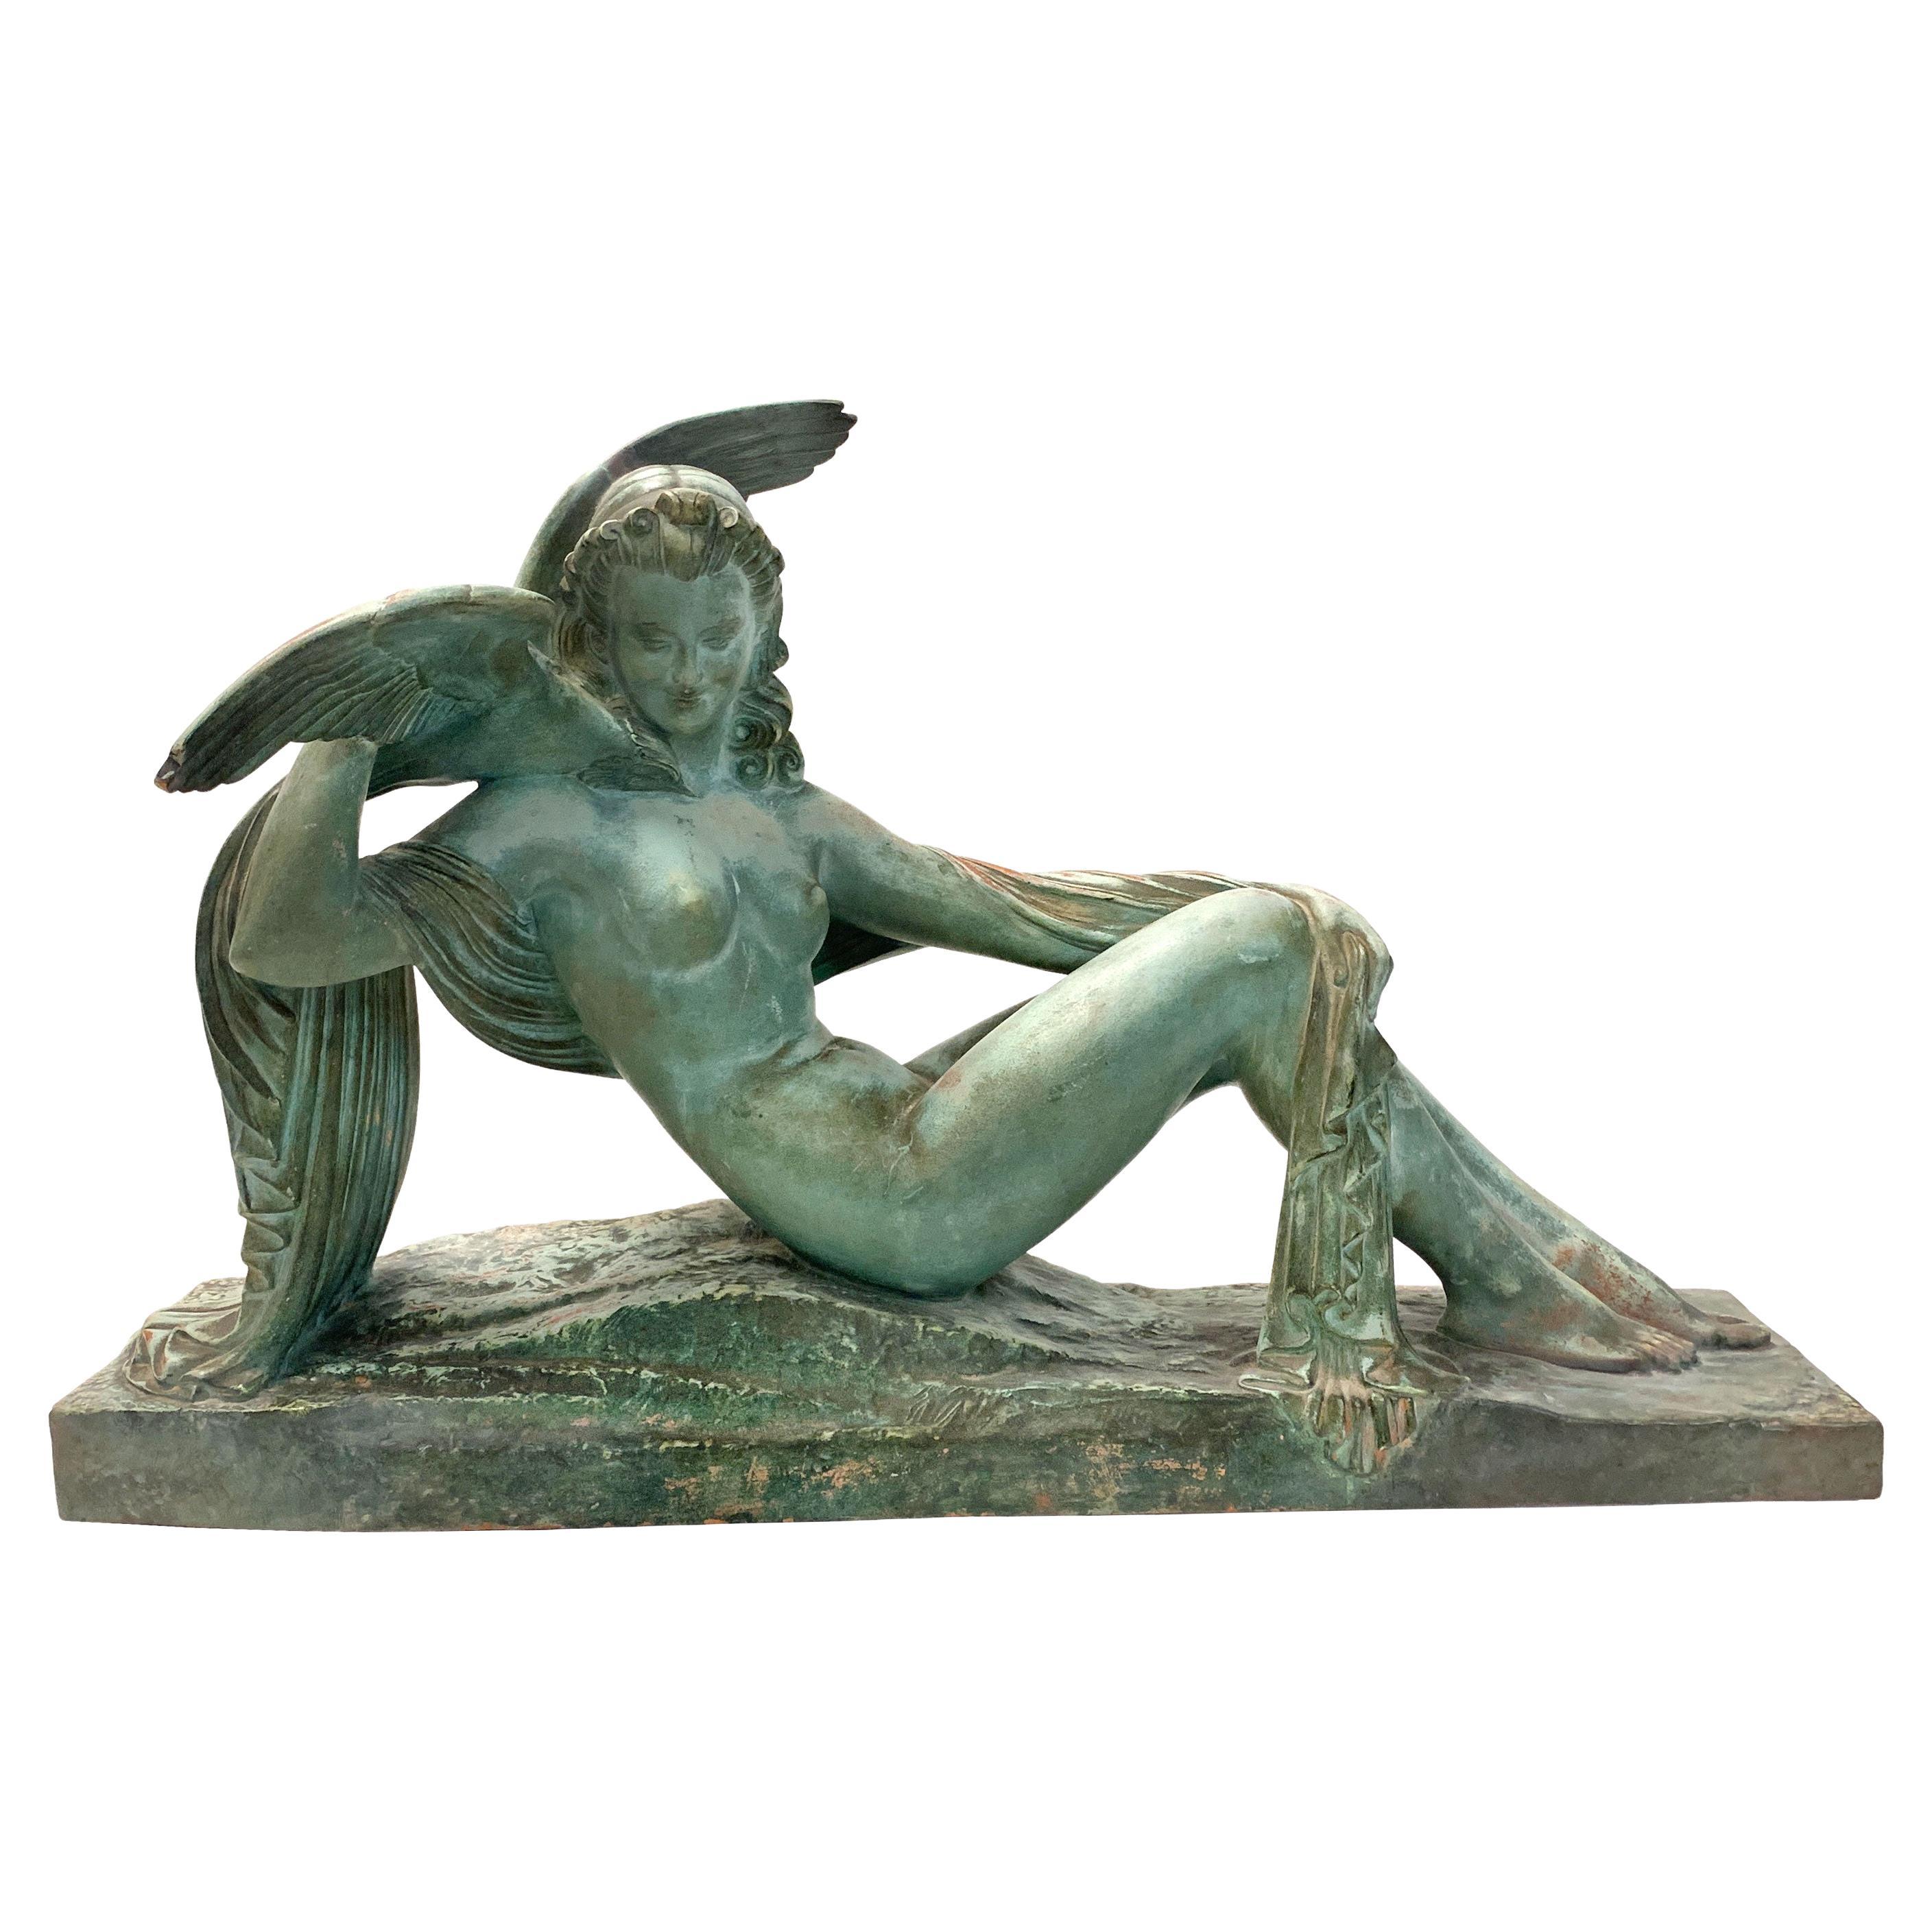 "Nude with Bird of Paradise" Art Deco Figurative Sculpture By D.H. Chiparus